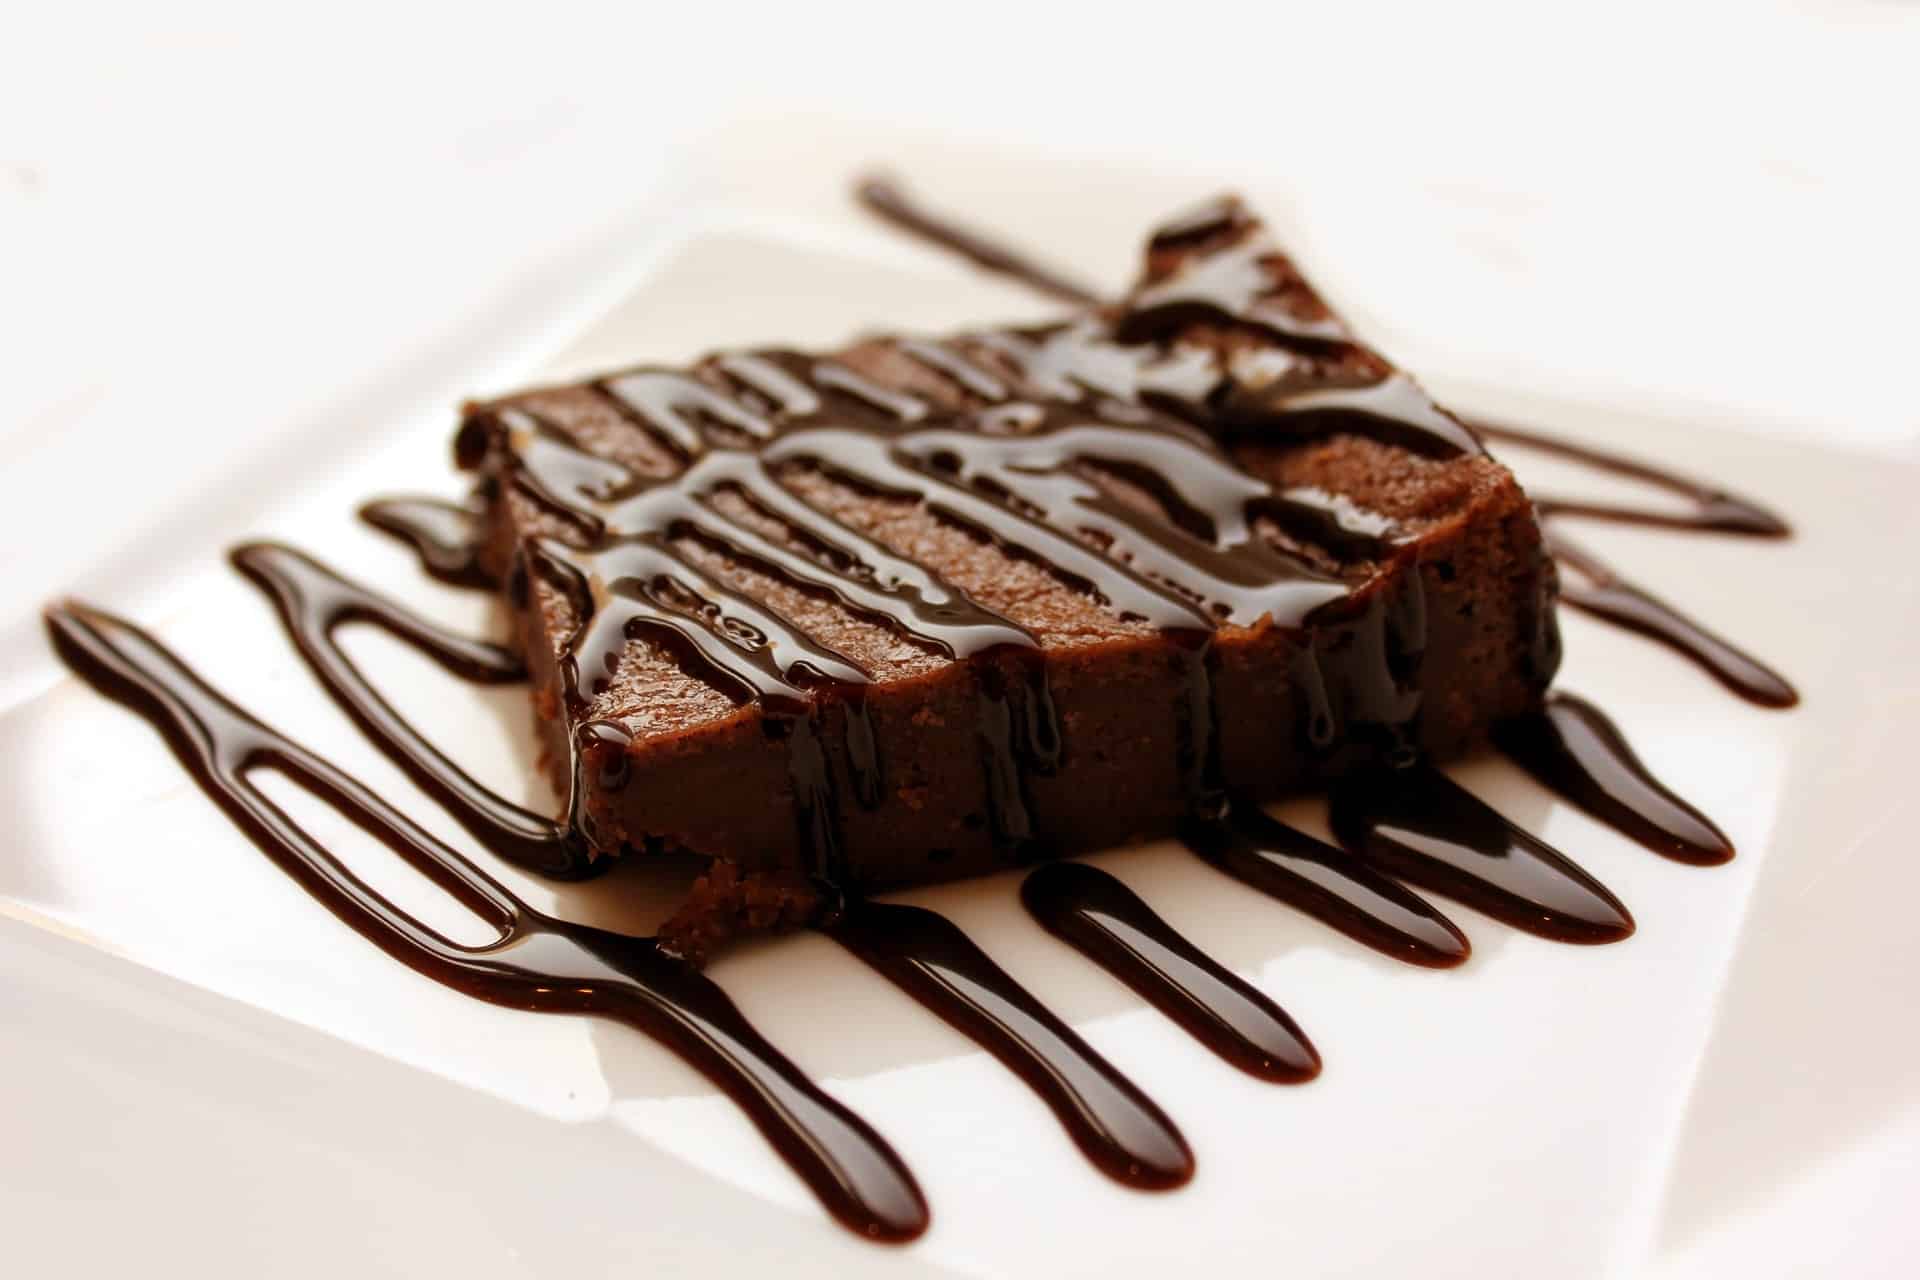 How to make a brownie with CBD?